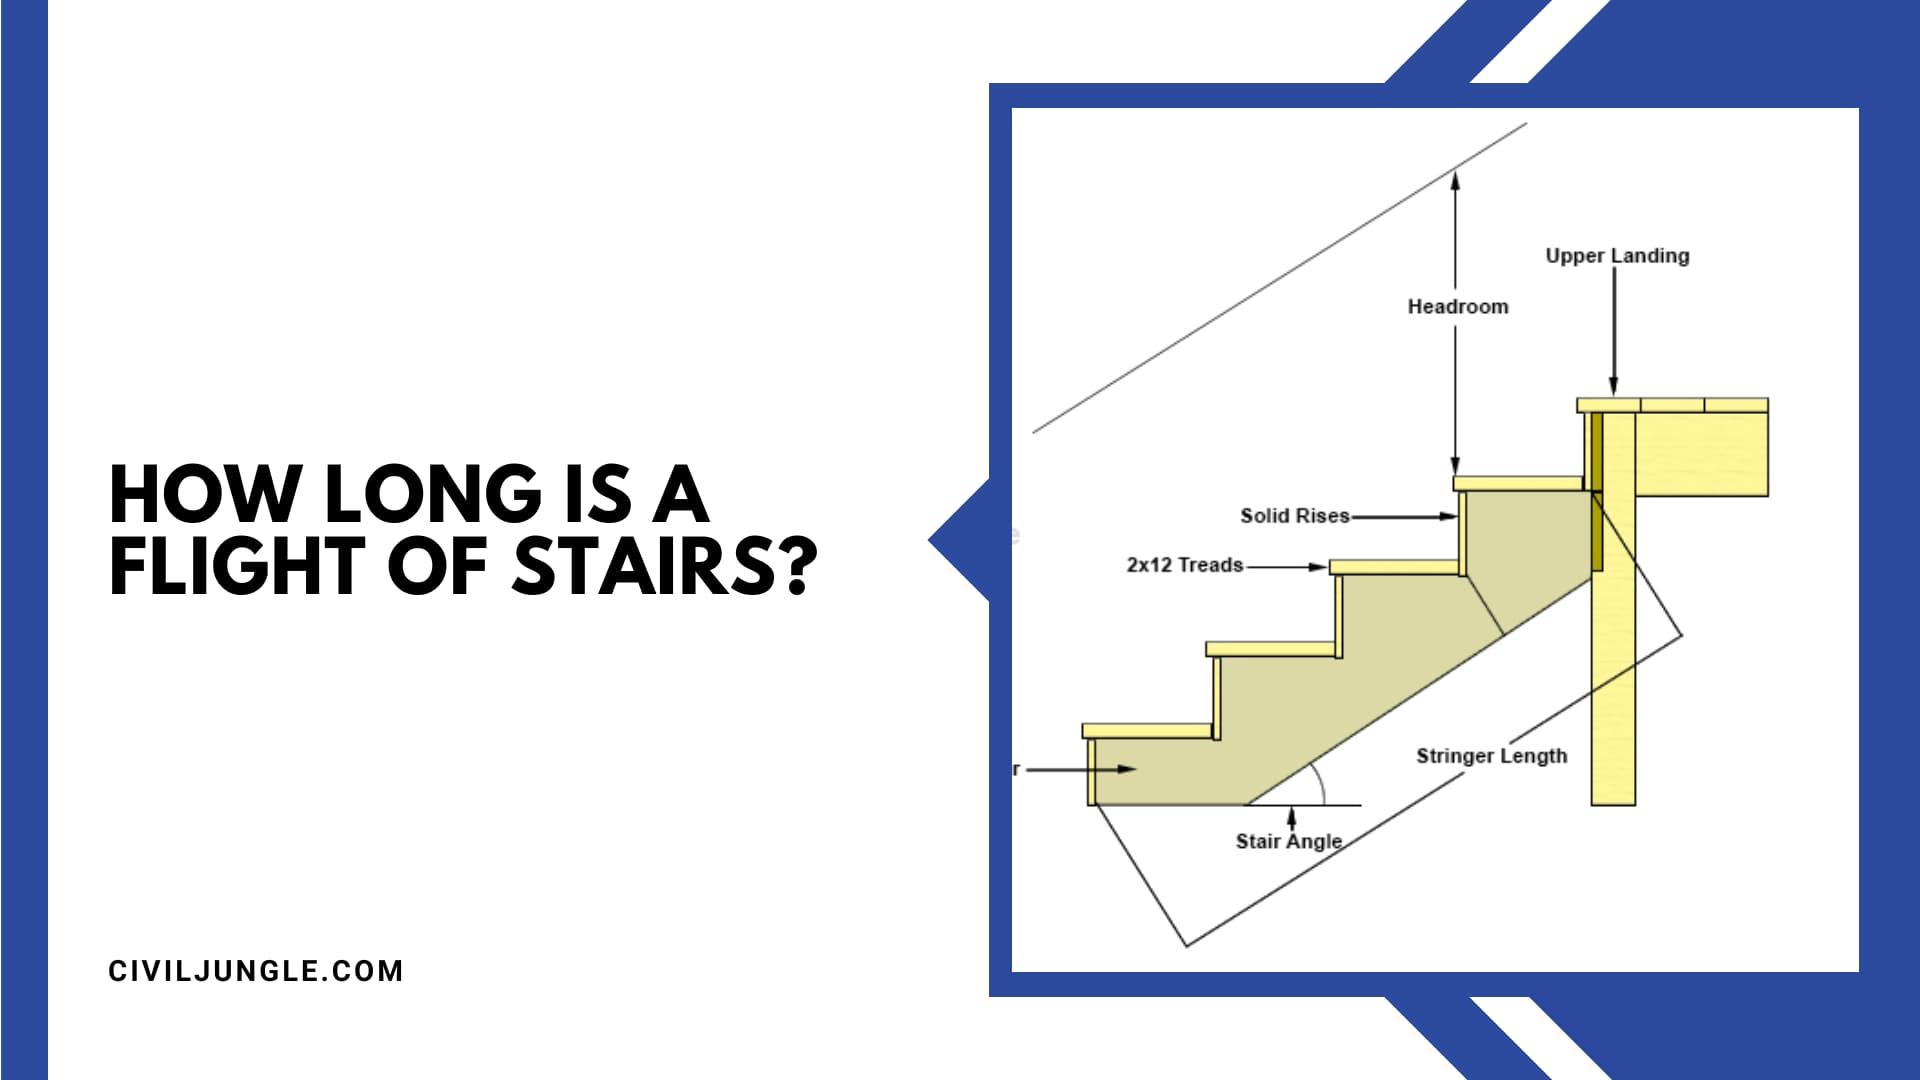 How Long Is a Flight of Stairs?